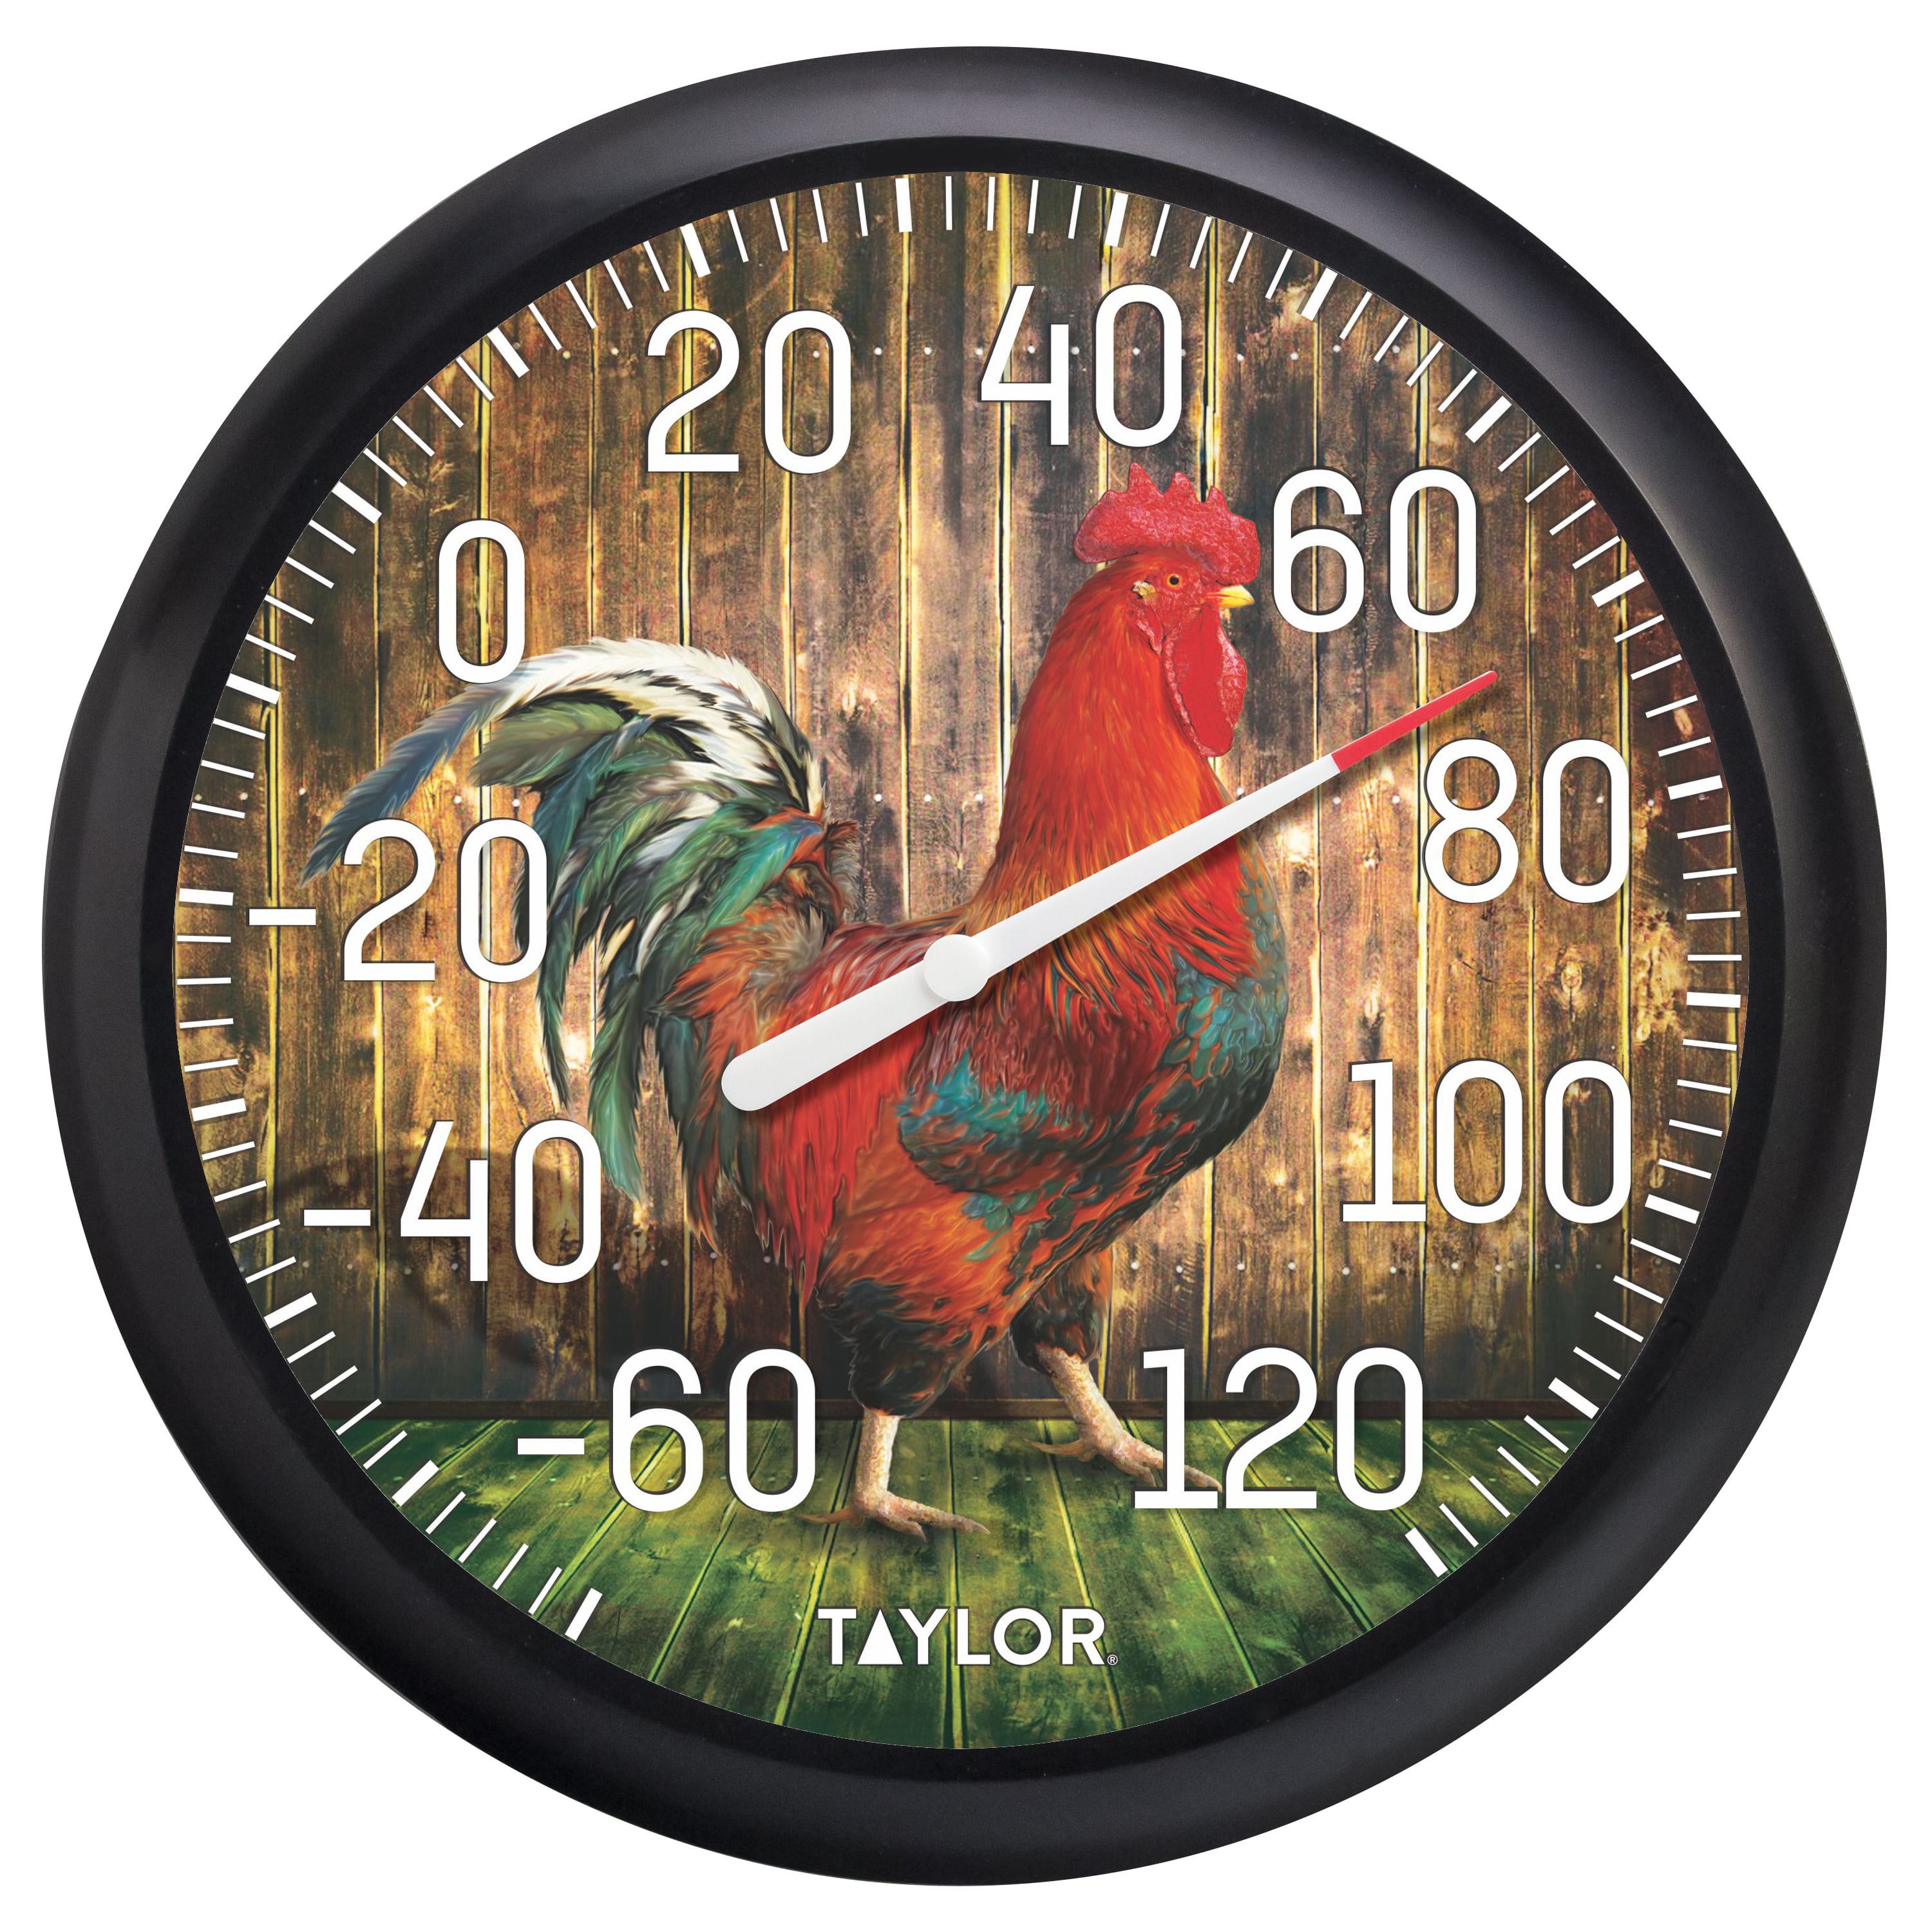 Taylor® Precision Products 13.25-inch Big And Bold Dial Outdoor